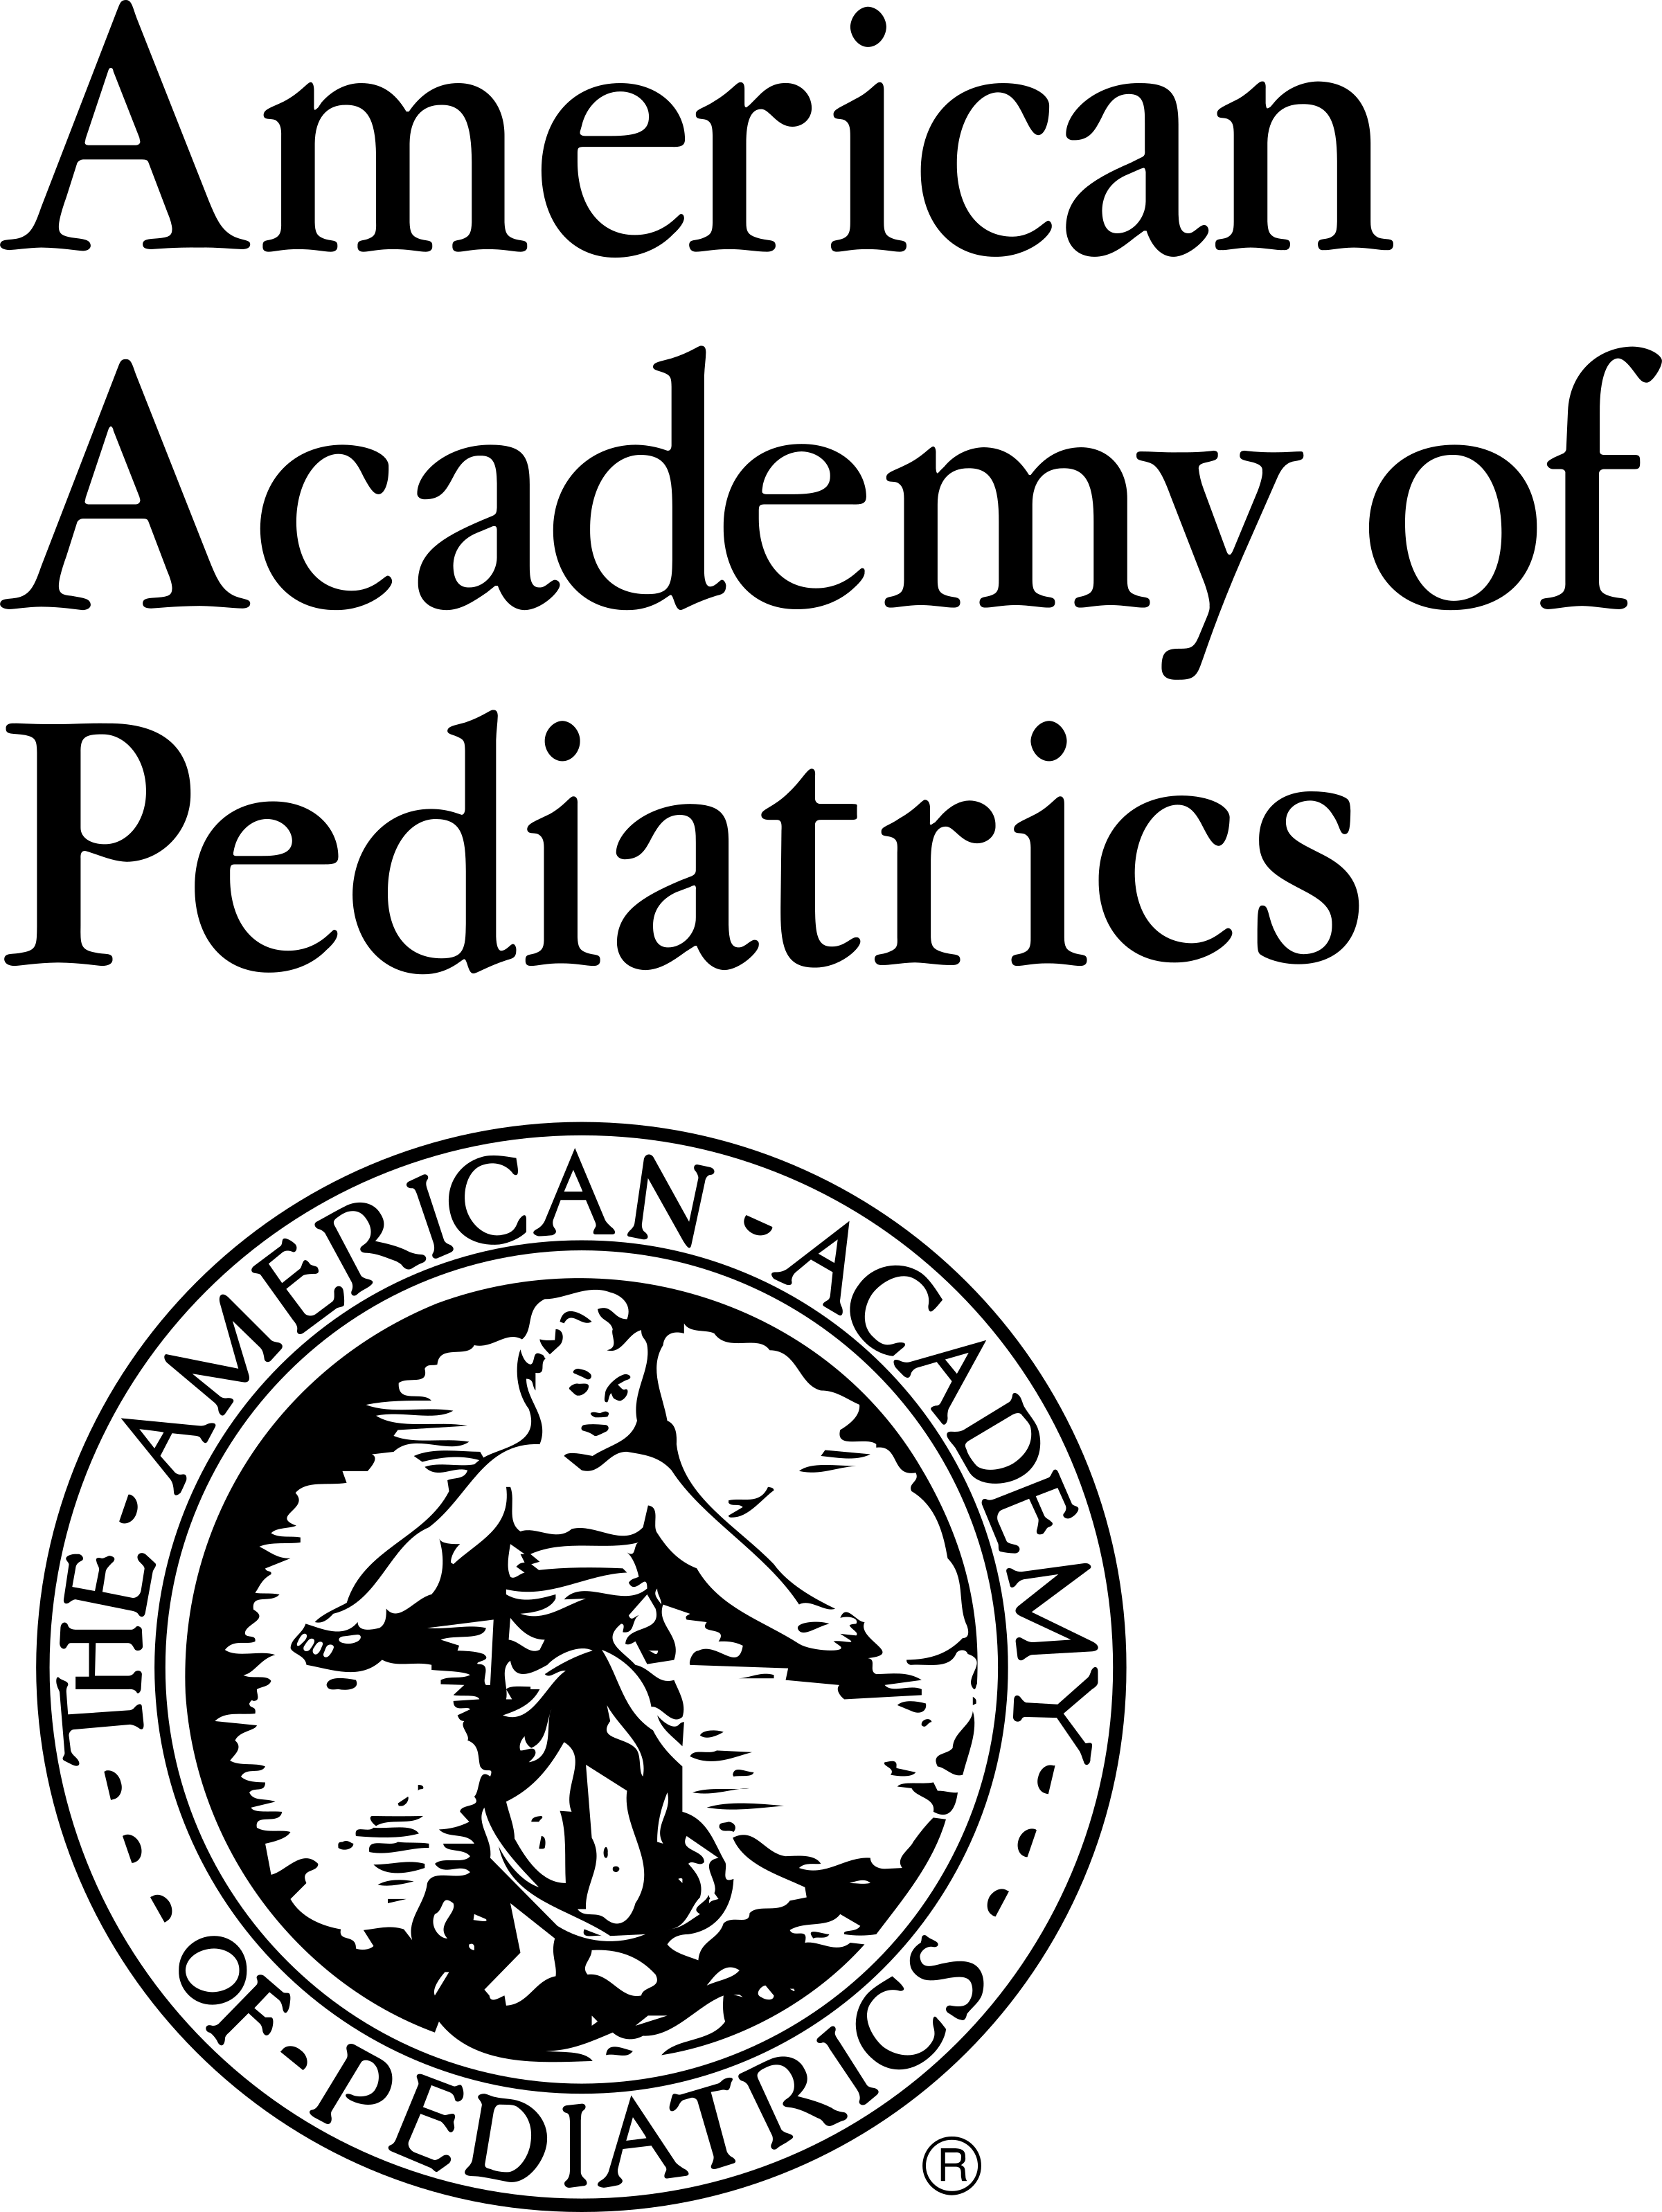 American Academy of Pediatrics Resources Injury Risk is Martial Arts Organized Sports for Youth Promotion...